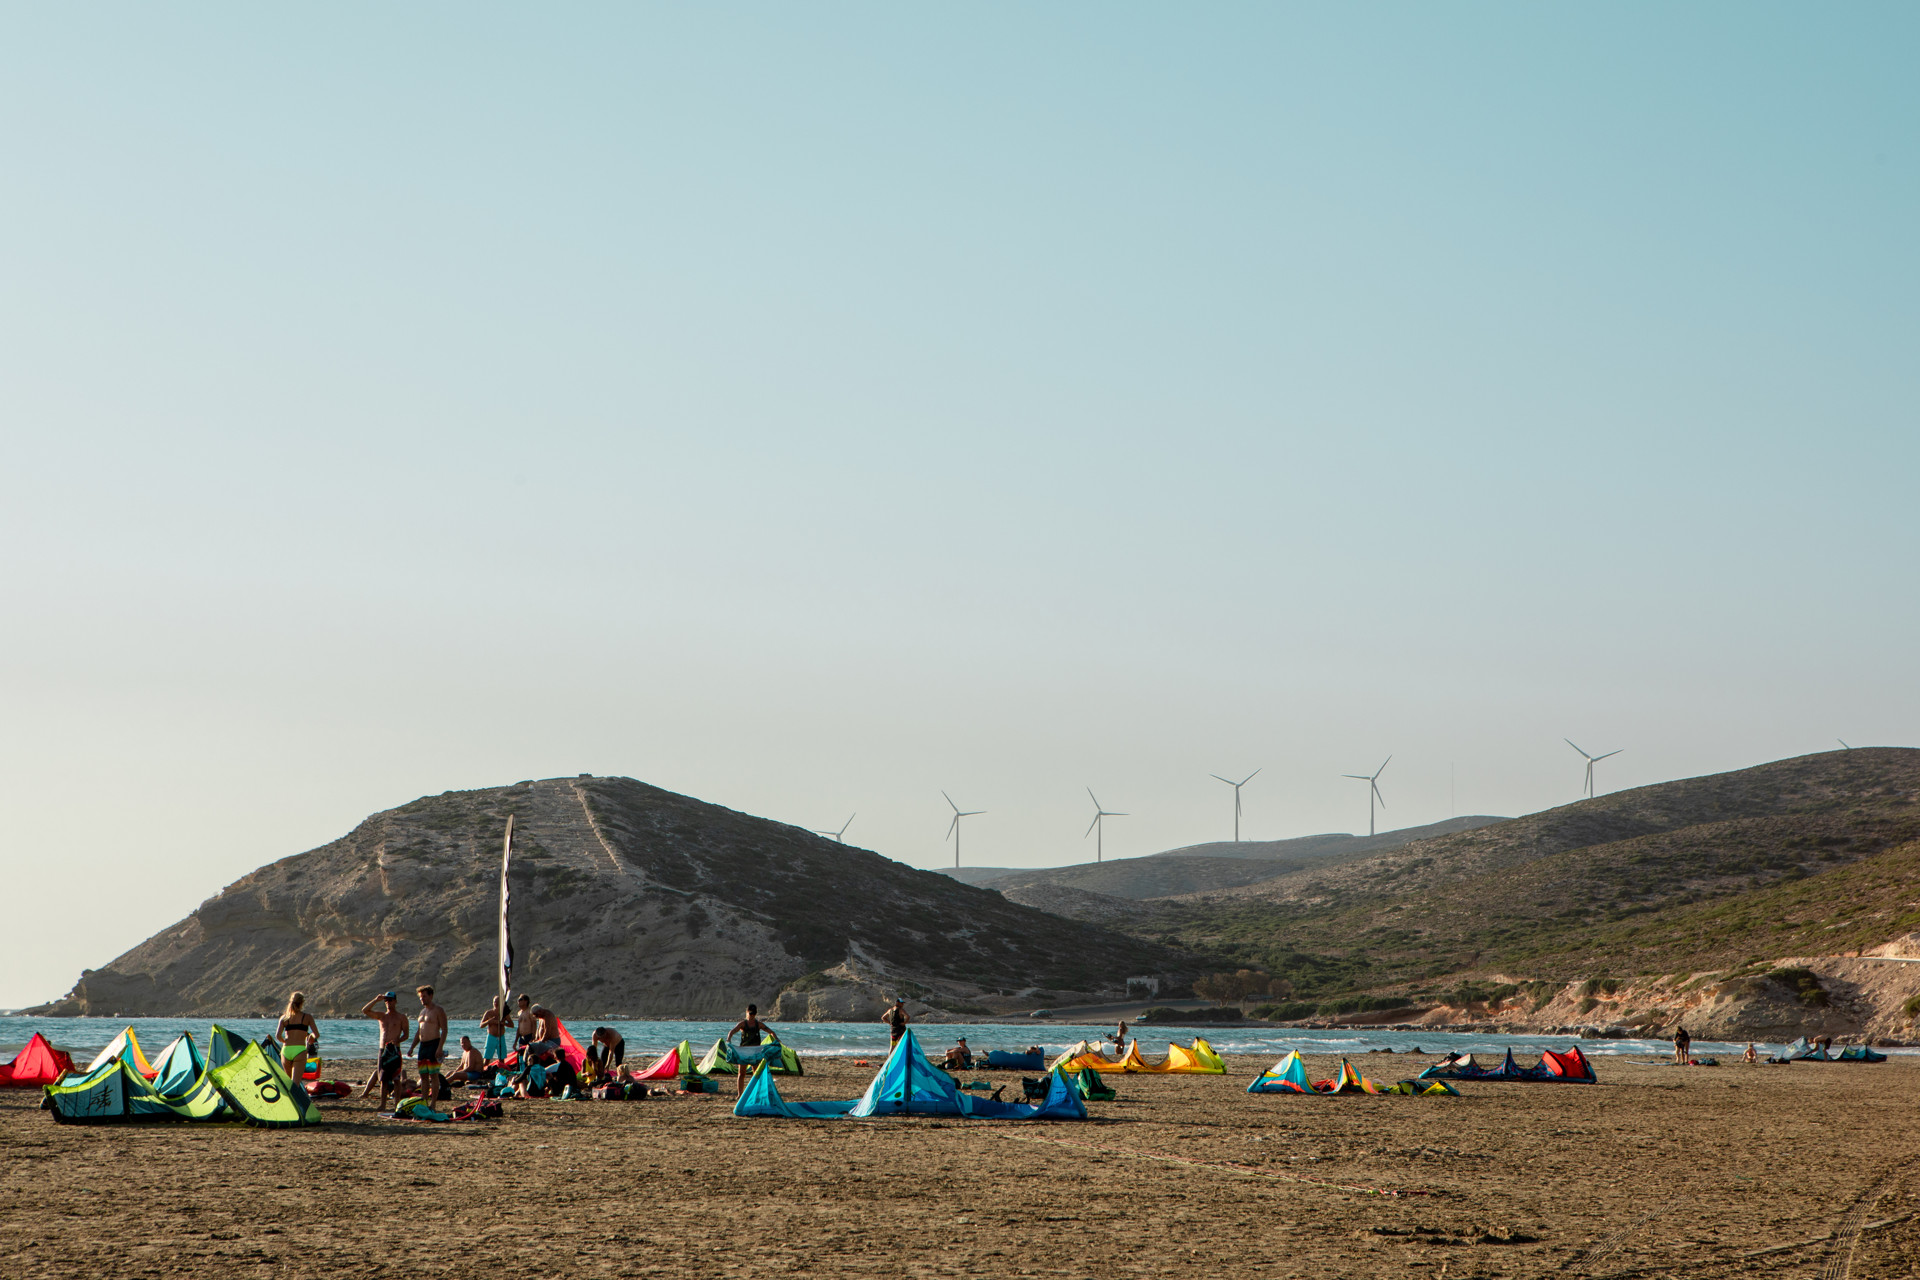 There are windsurf and kitesurf providers on Prasonisi beach with equipment to rent and skilled instructors for all levels